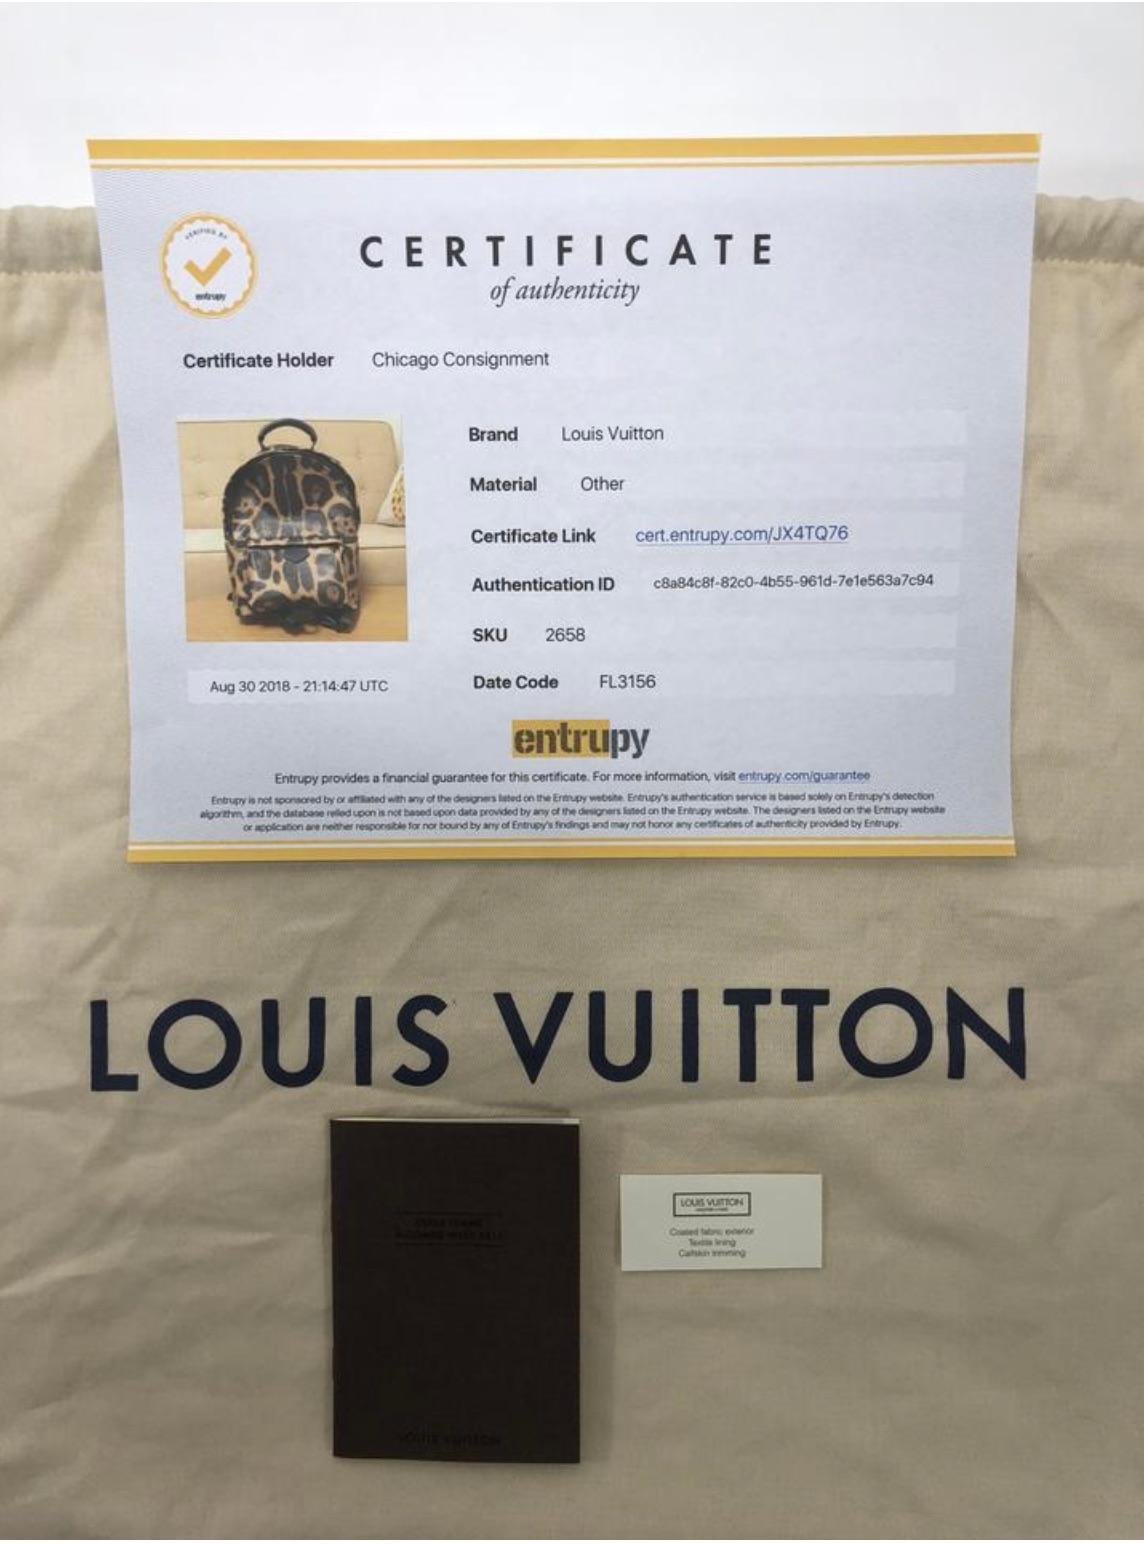 MODEL - Louis Vuitton Limited Edition Wild Animal Print Palm Springs Backpack PM

CONDITION - New!  No signs of wear.

SKU - 2658

DATE/SERIAL CODE - FL3156

ORIGIN - France

PRODUCTION - 2016

DIMENSIONS - L8.25 x H11.5 x D3.5

STRAP/HANDLE DROP -